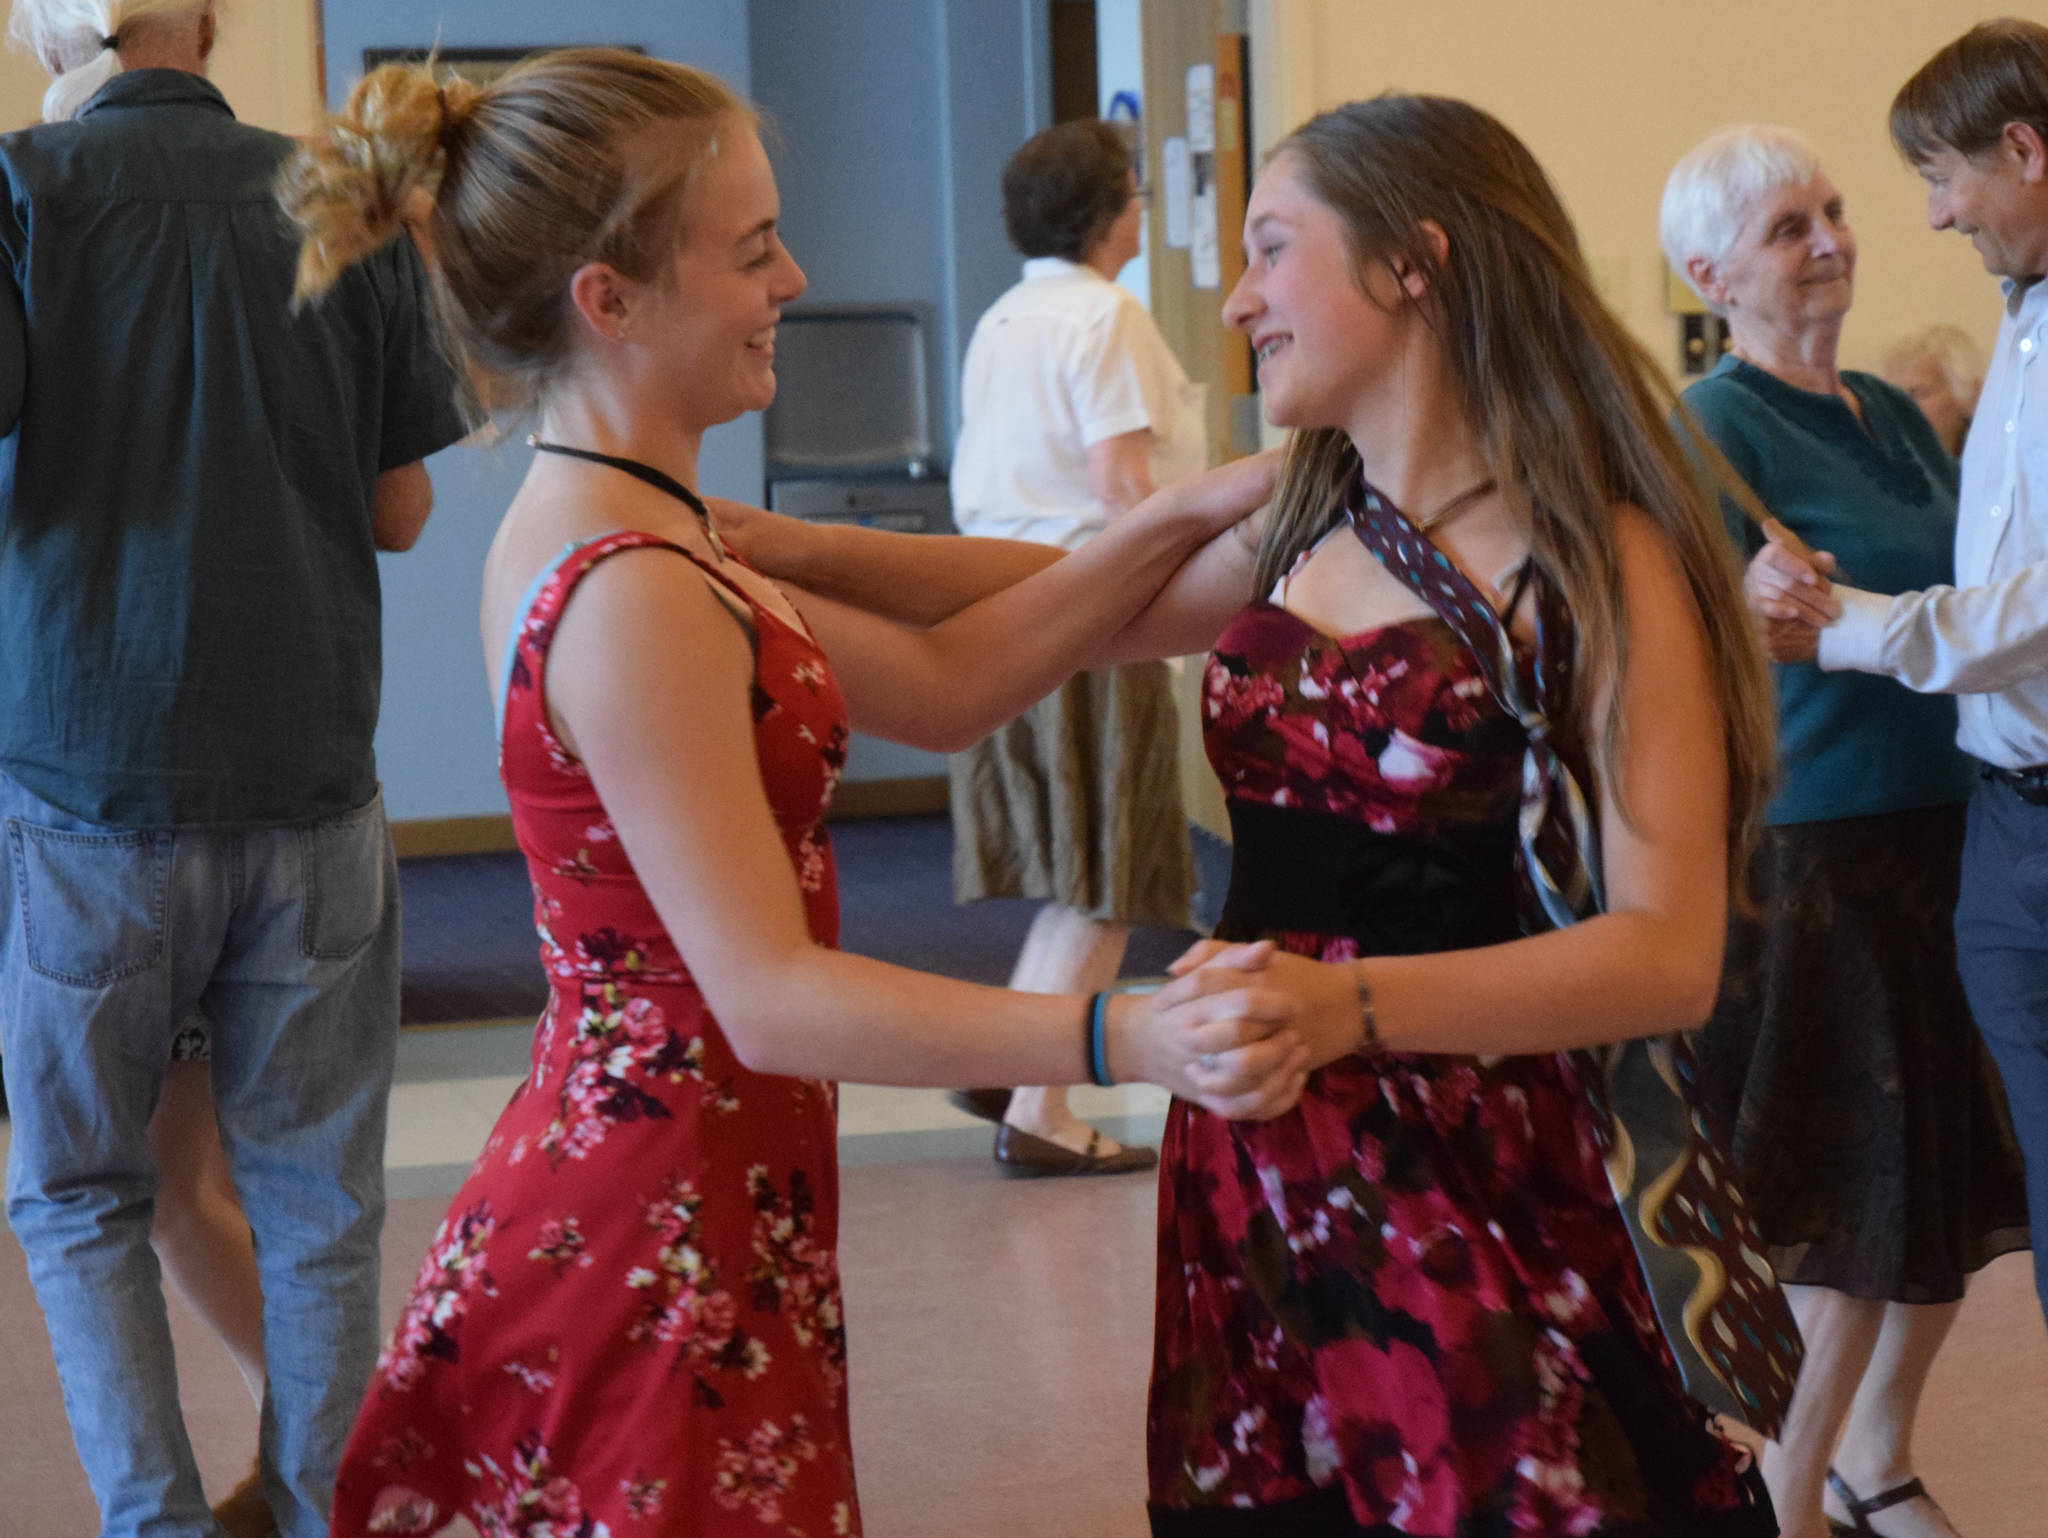 Ellie Knapp and Adelie McMillan dance together at the annual pre-fireworks “Barn Dance” at St. Ann’s Parish Hall Tueday, July 3. (Gregory Philson | Juneau Empire)